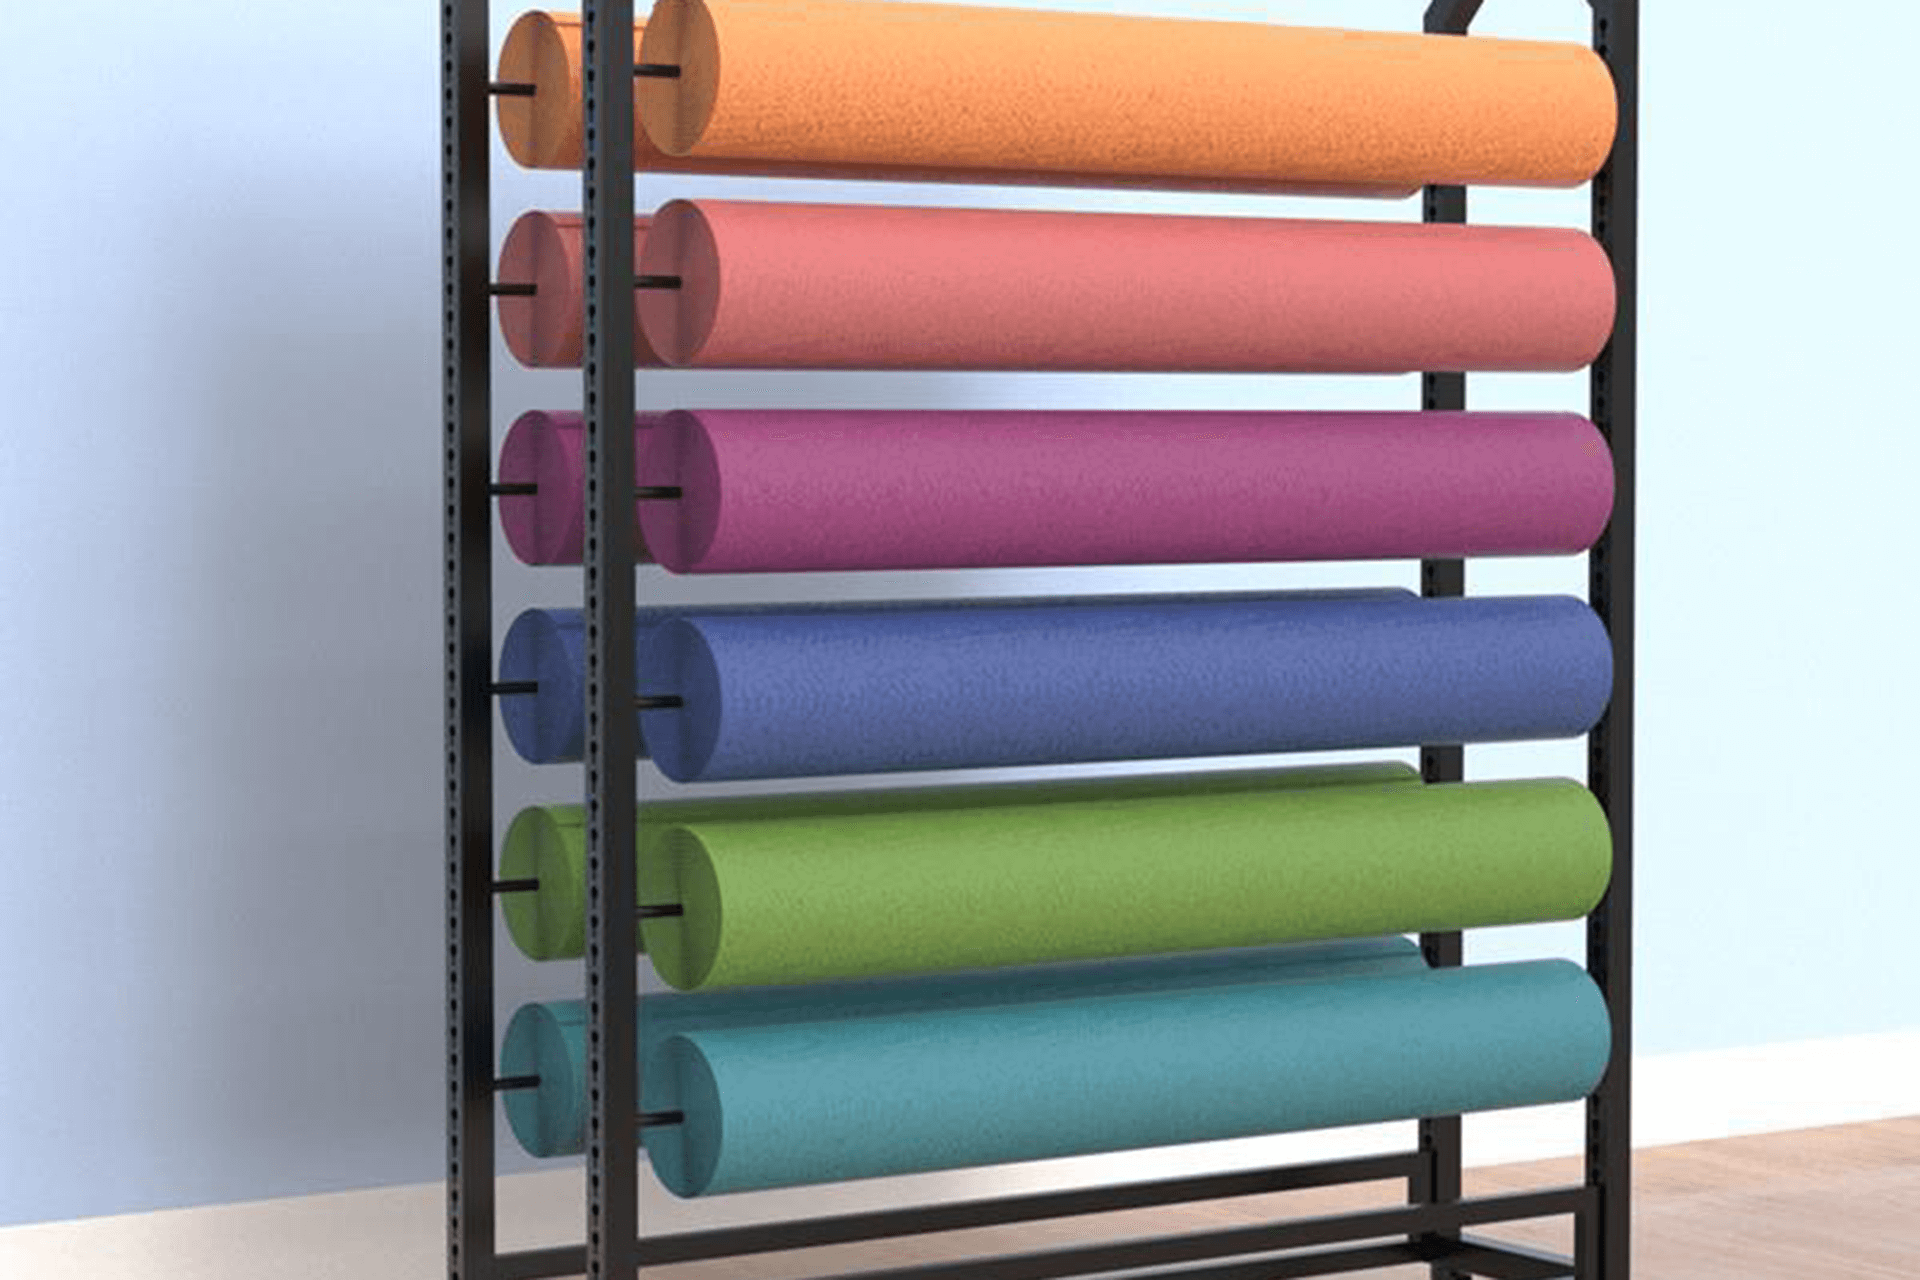 Fabric Display Racks To Create A Unique Storefront Atmosphere